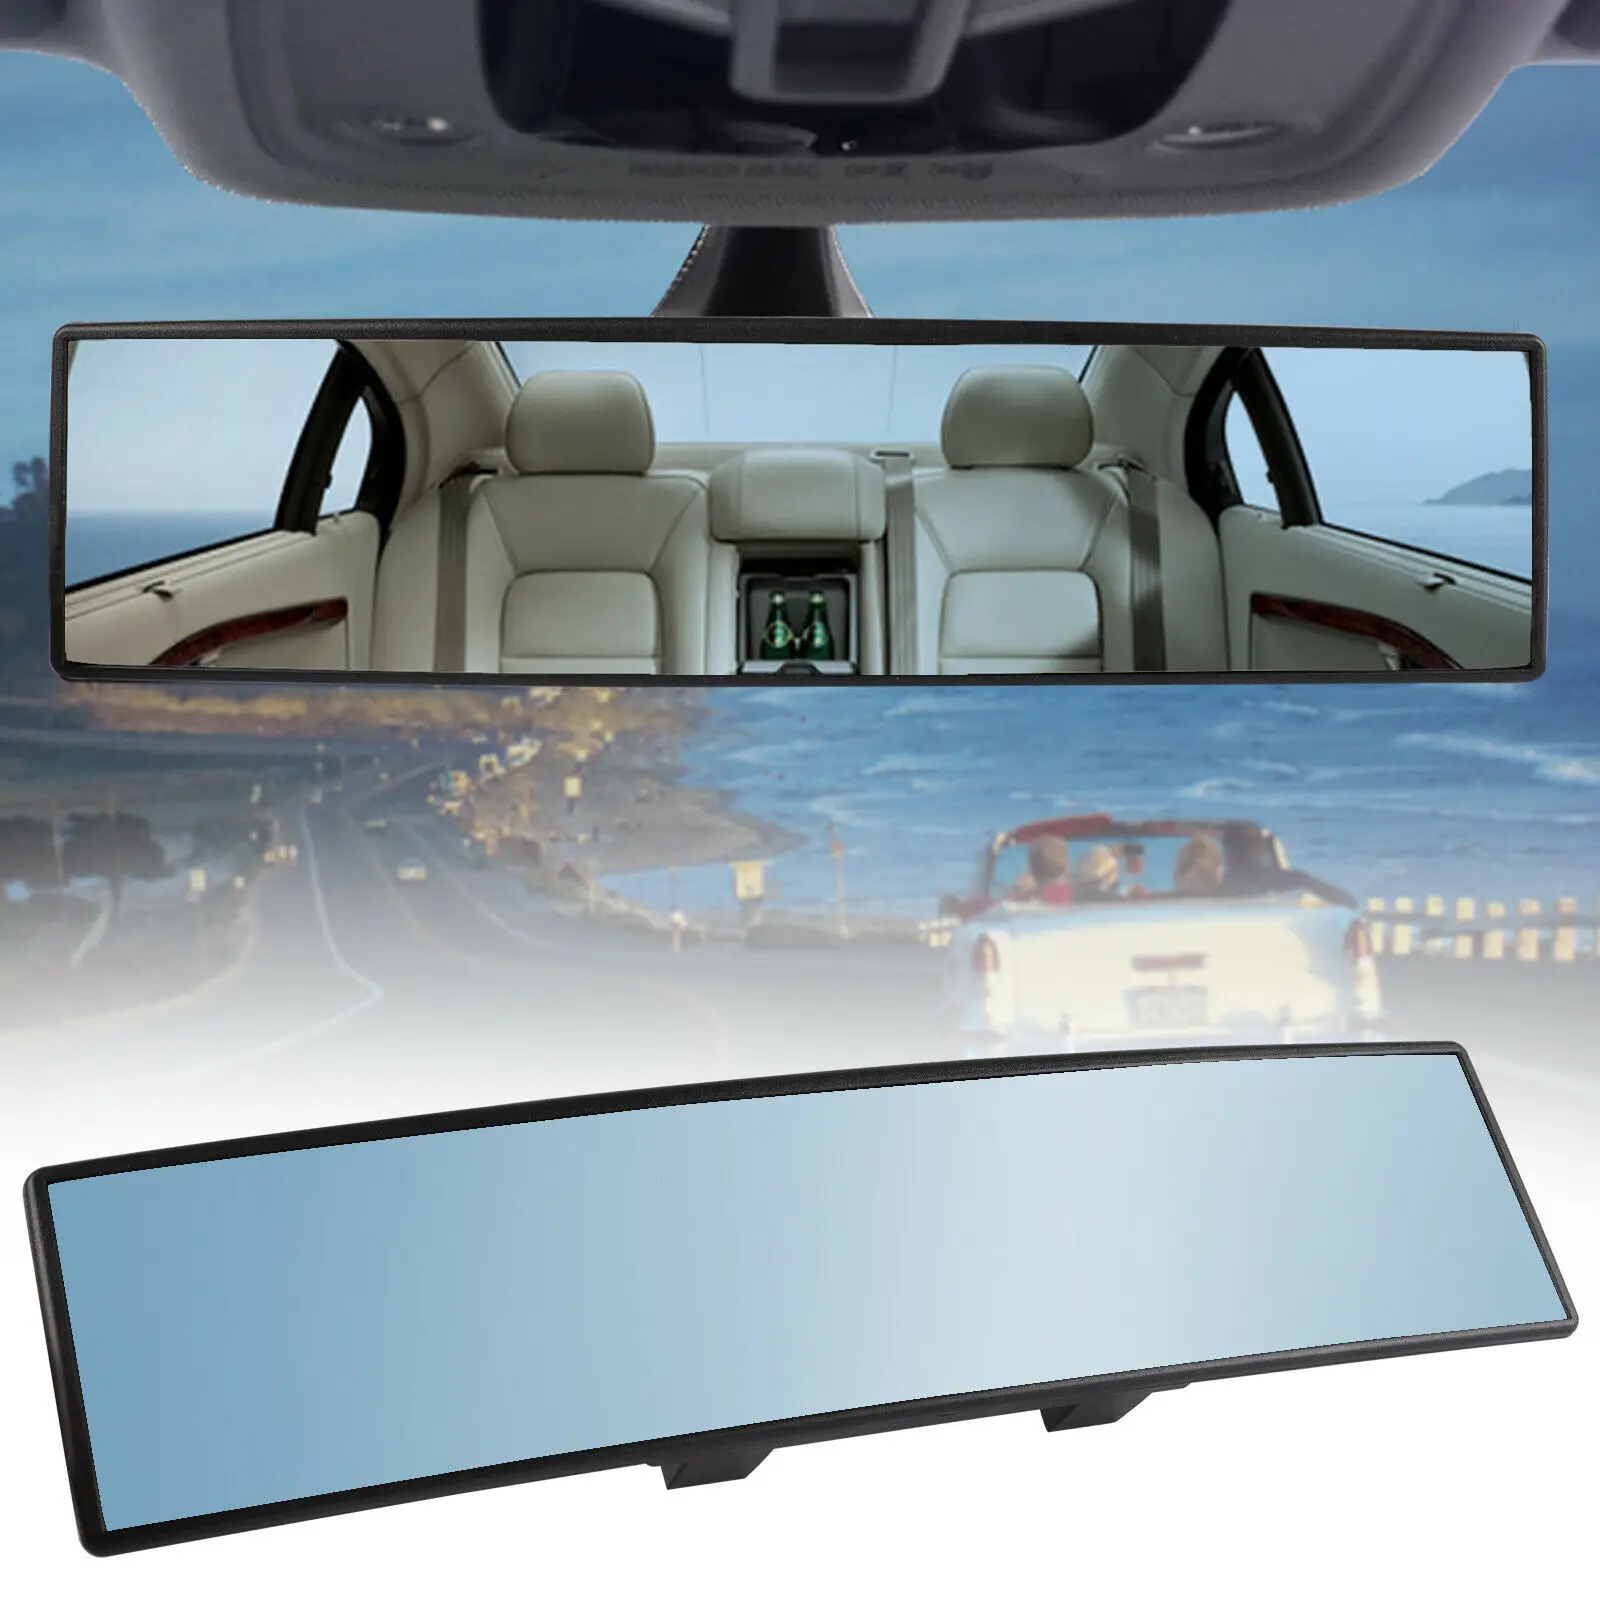 

300mm Car Rear View Mirror Anti-Glare Blue Curved Glass Mirror Blind angle Automotive Rearview Mirror